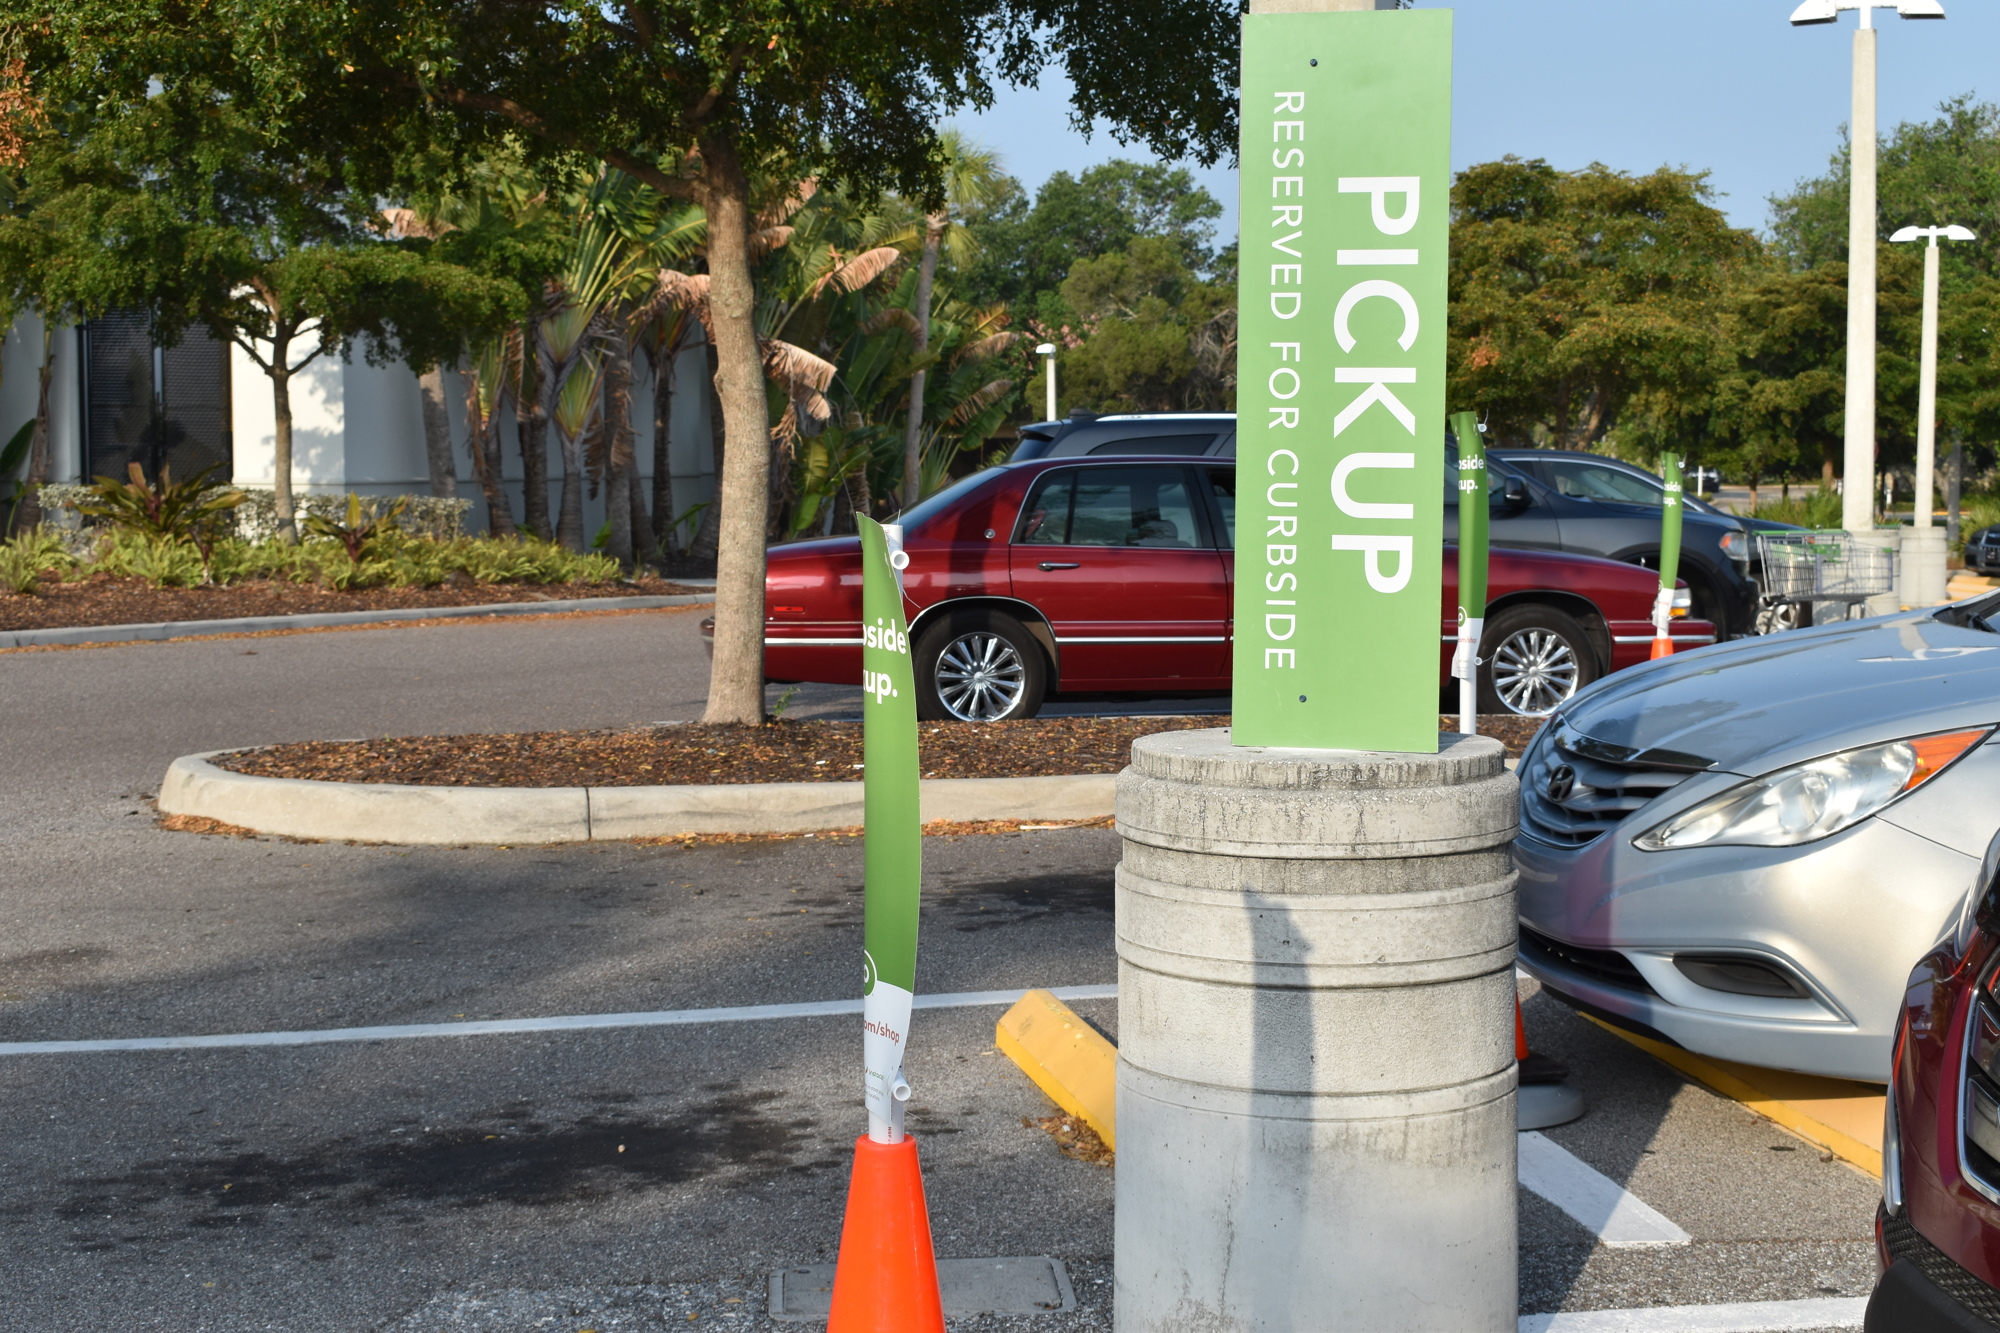 The Longboat Key Publix store launched its curbside pickup service in April.